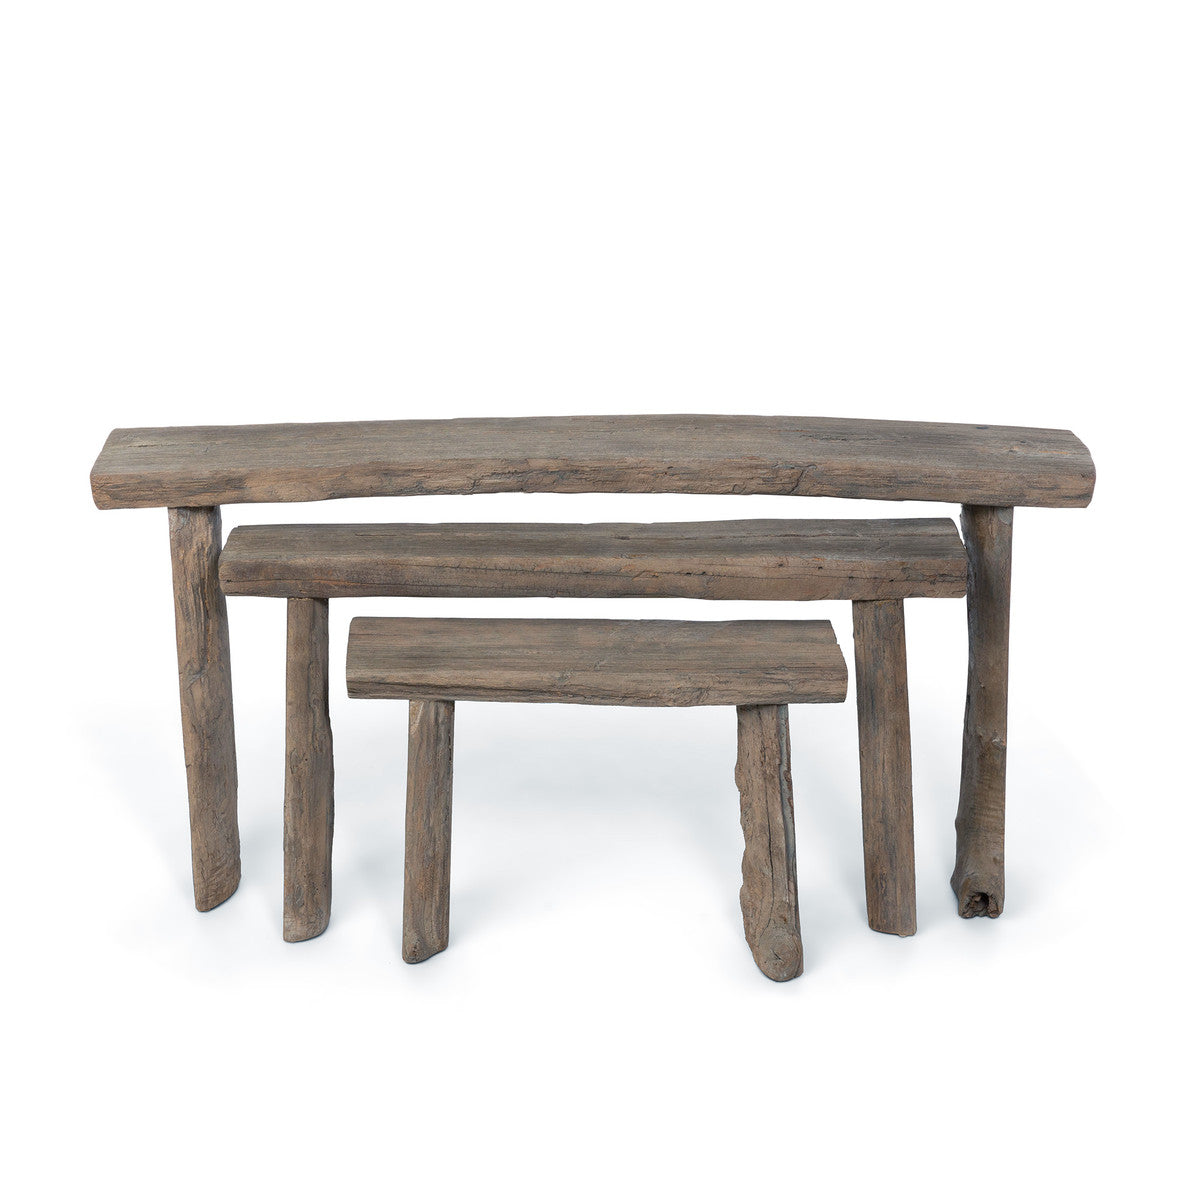 Reclaimed Wood Nesting Tables - Set of 3